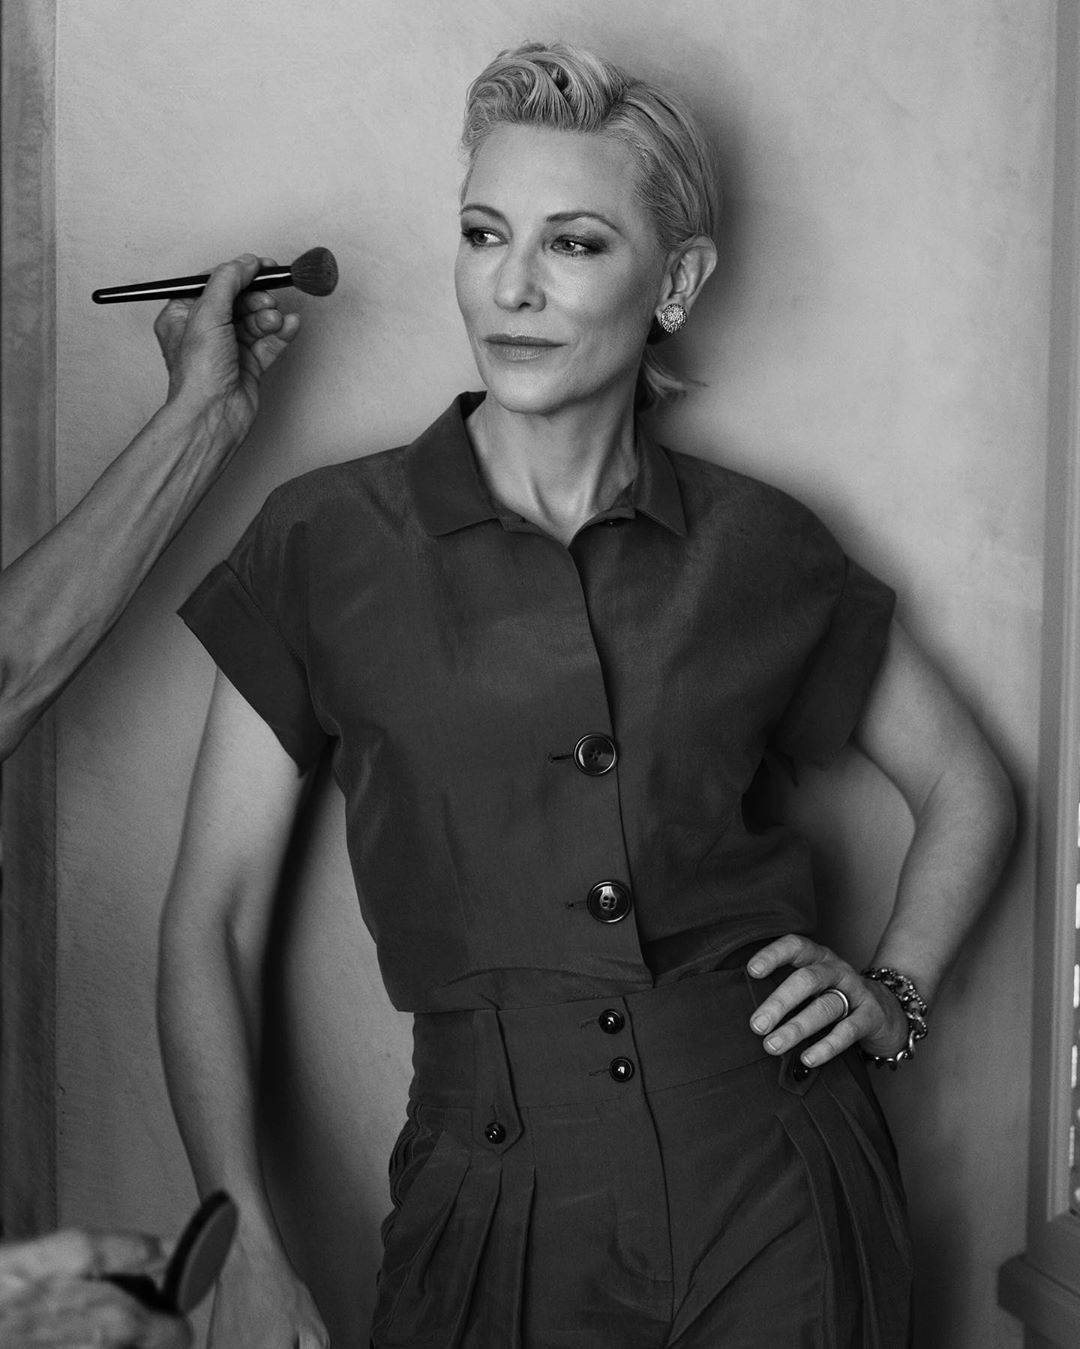 Armani beauty - Behind the scenes at the Venice Film Festival with @gregwilliamsphotography. 

Closing the 77th Venice International Film Festival with a beauty moment shared with Cate Blanchett, Gior...